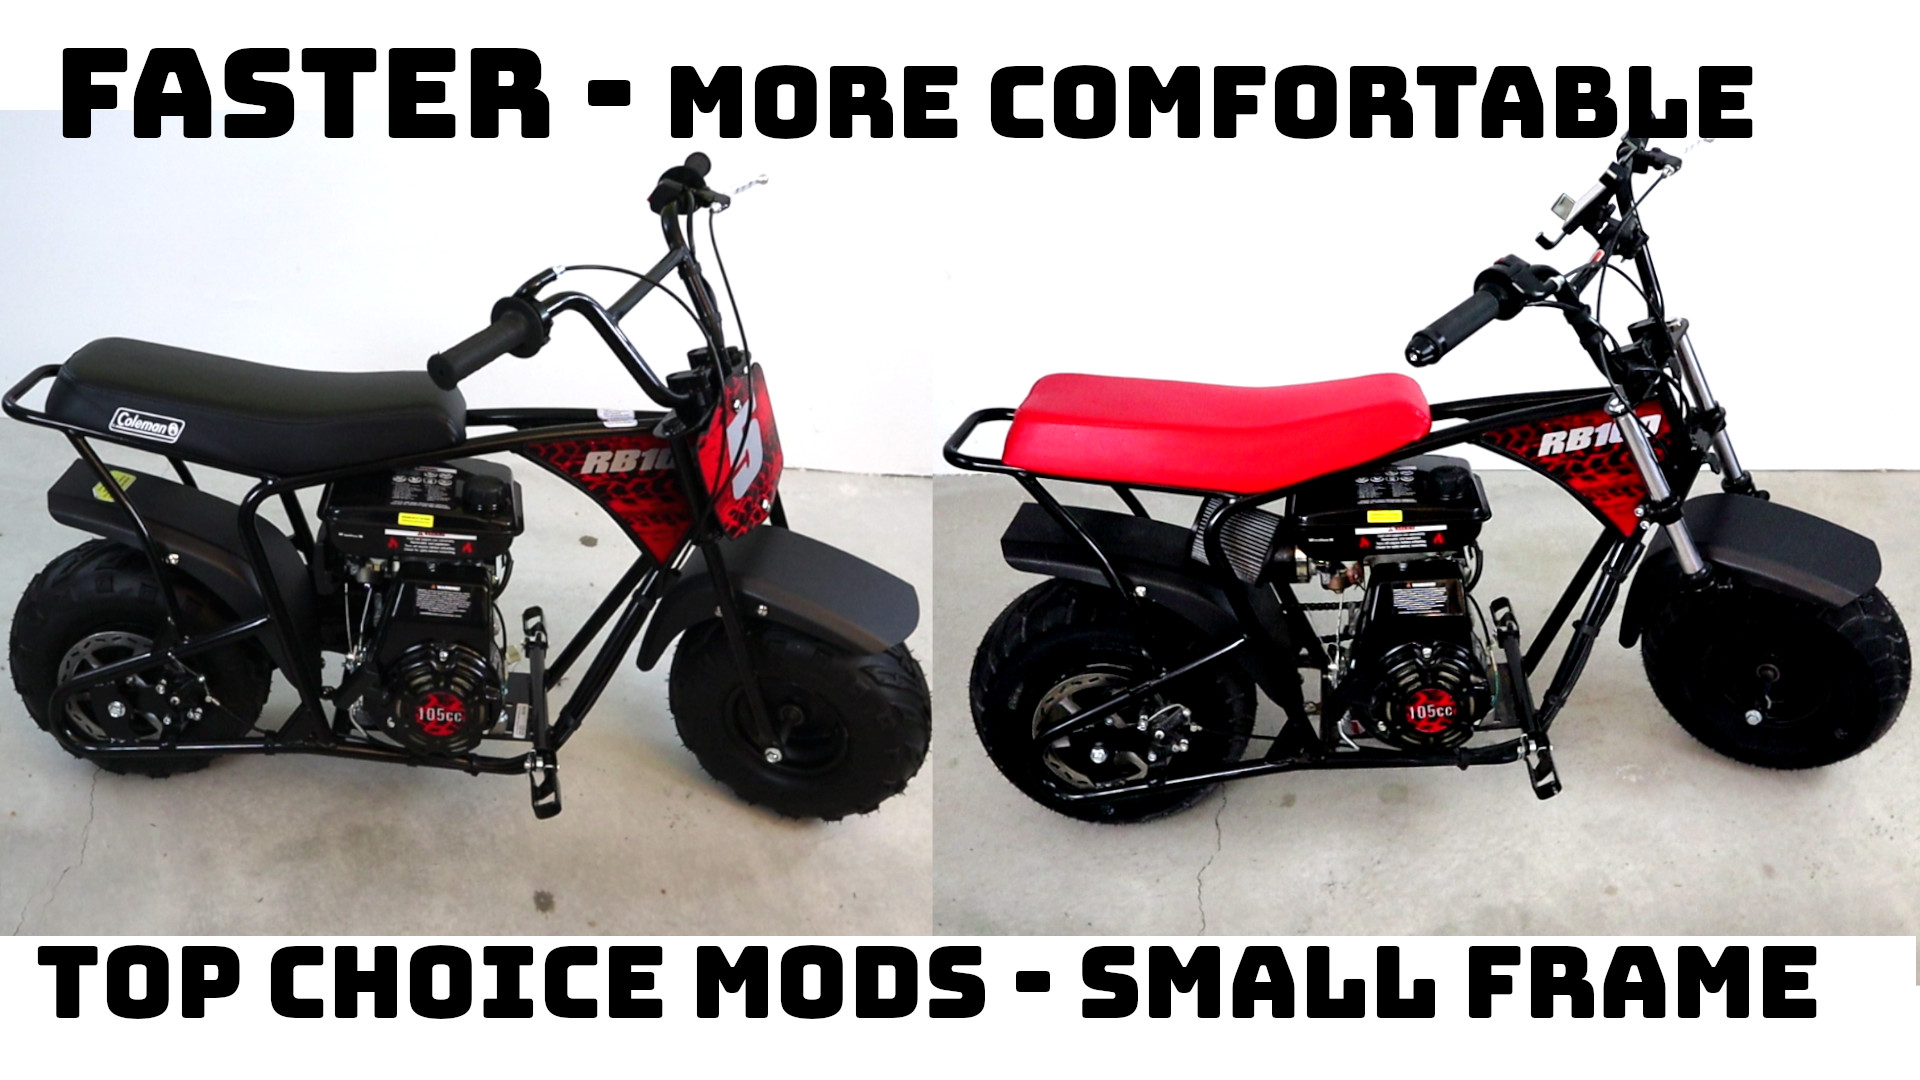 You are currently viewing Kids mini bike performance and comfort mods and accessories